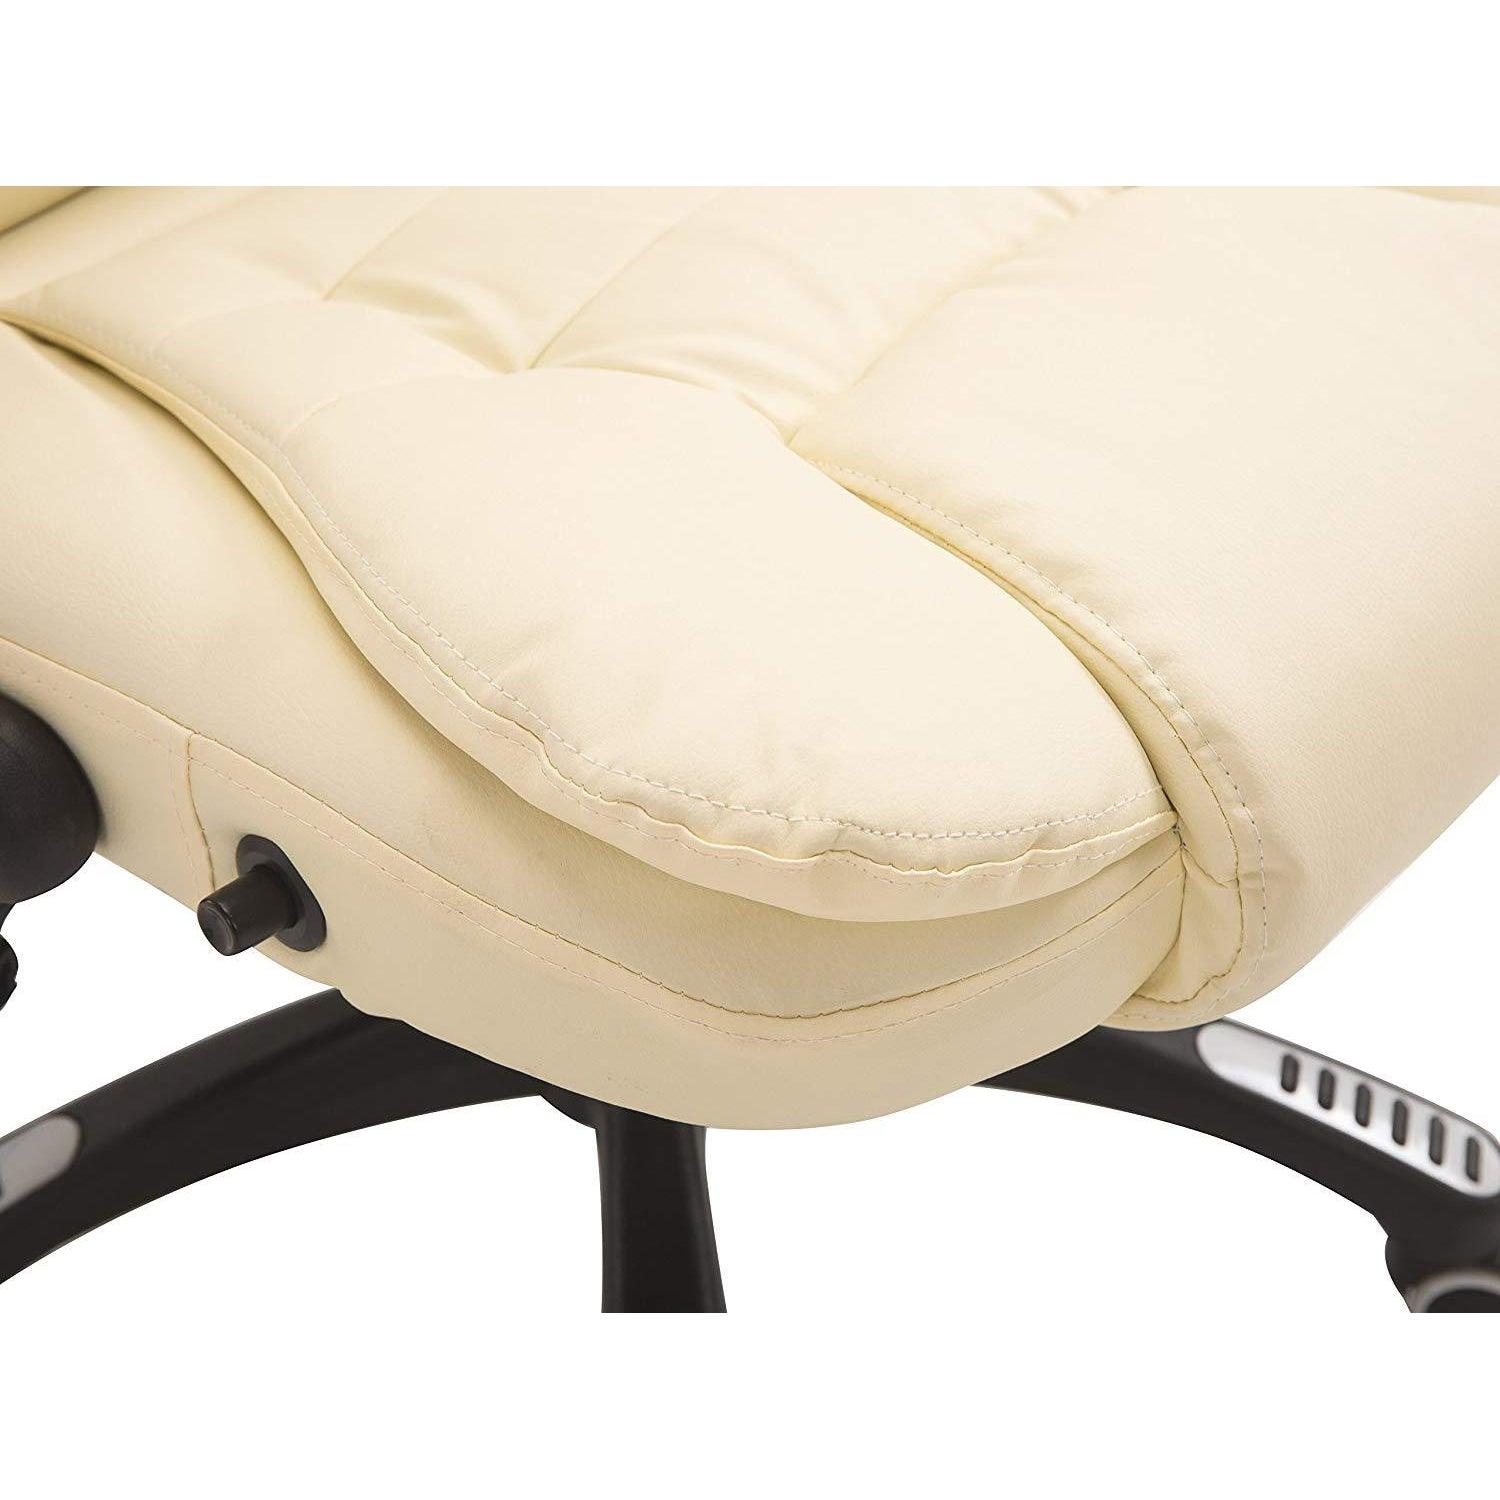 Executive Recline Padded Swivel Office Chair with Vibrating Massage Function, MM17 Cream